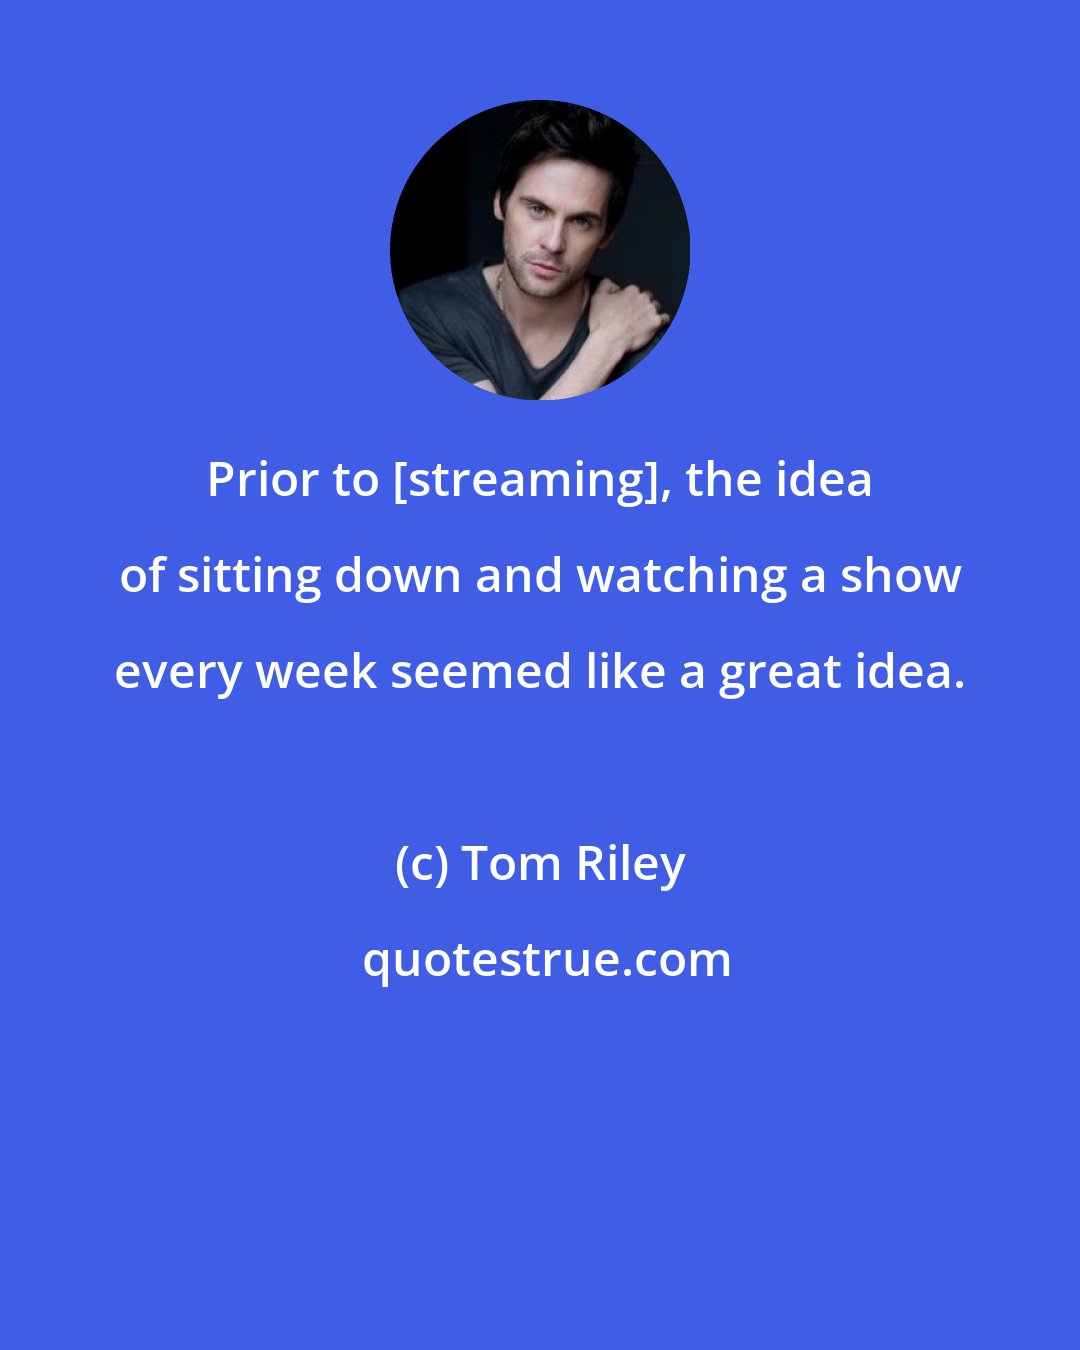 Tom Riley: Prior to [streaming], the idea of sitting down and watching a show every week seemed like a great idea.